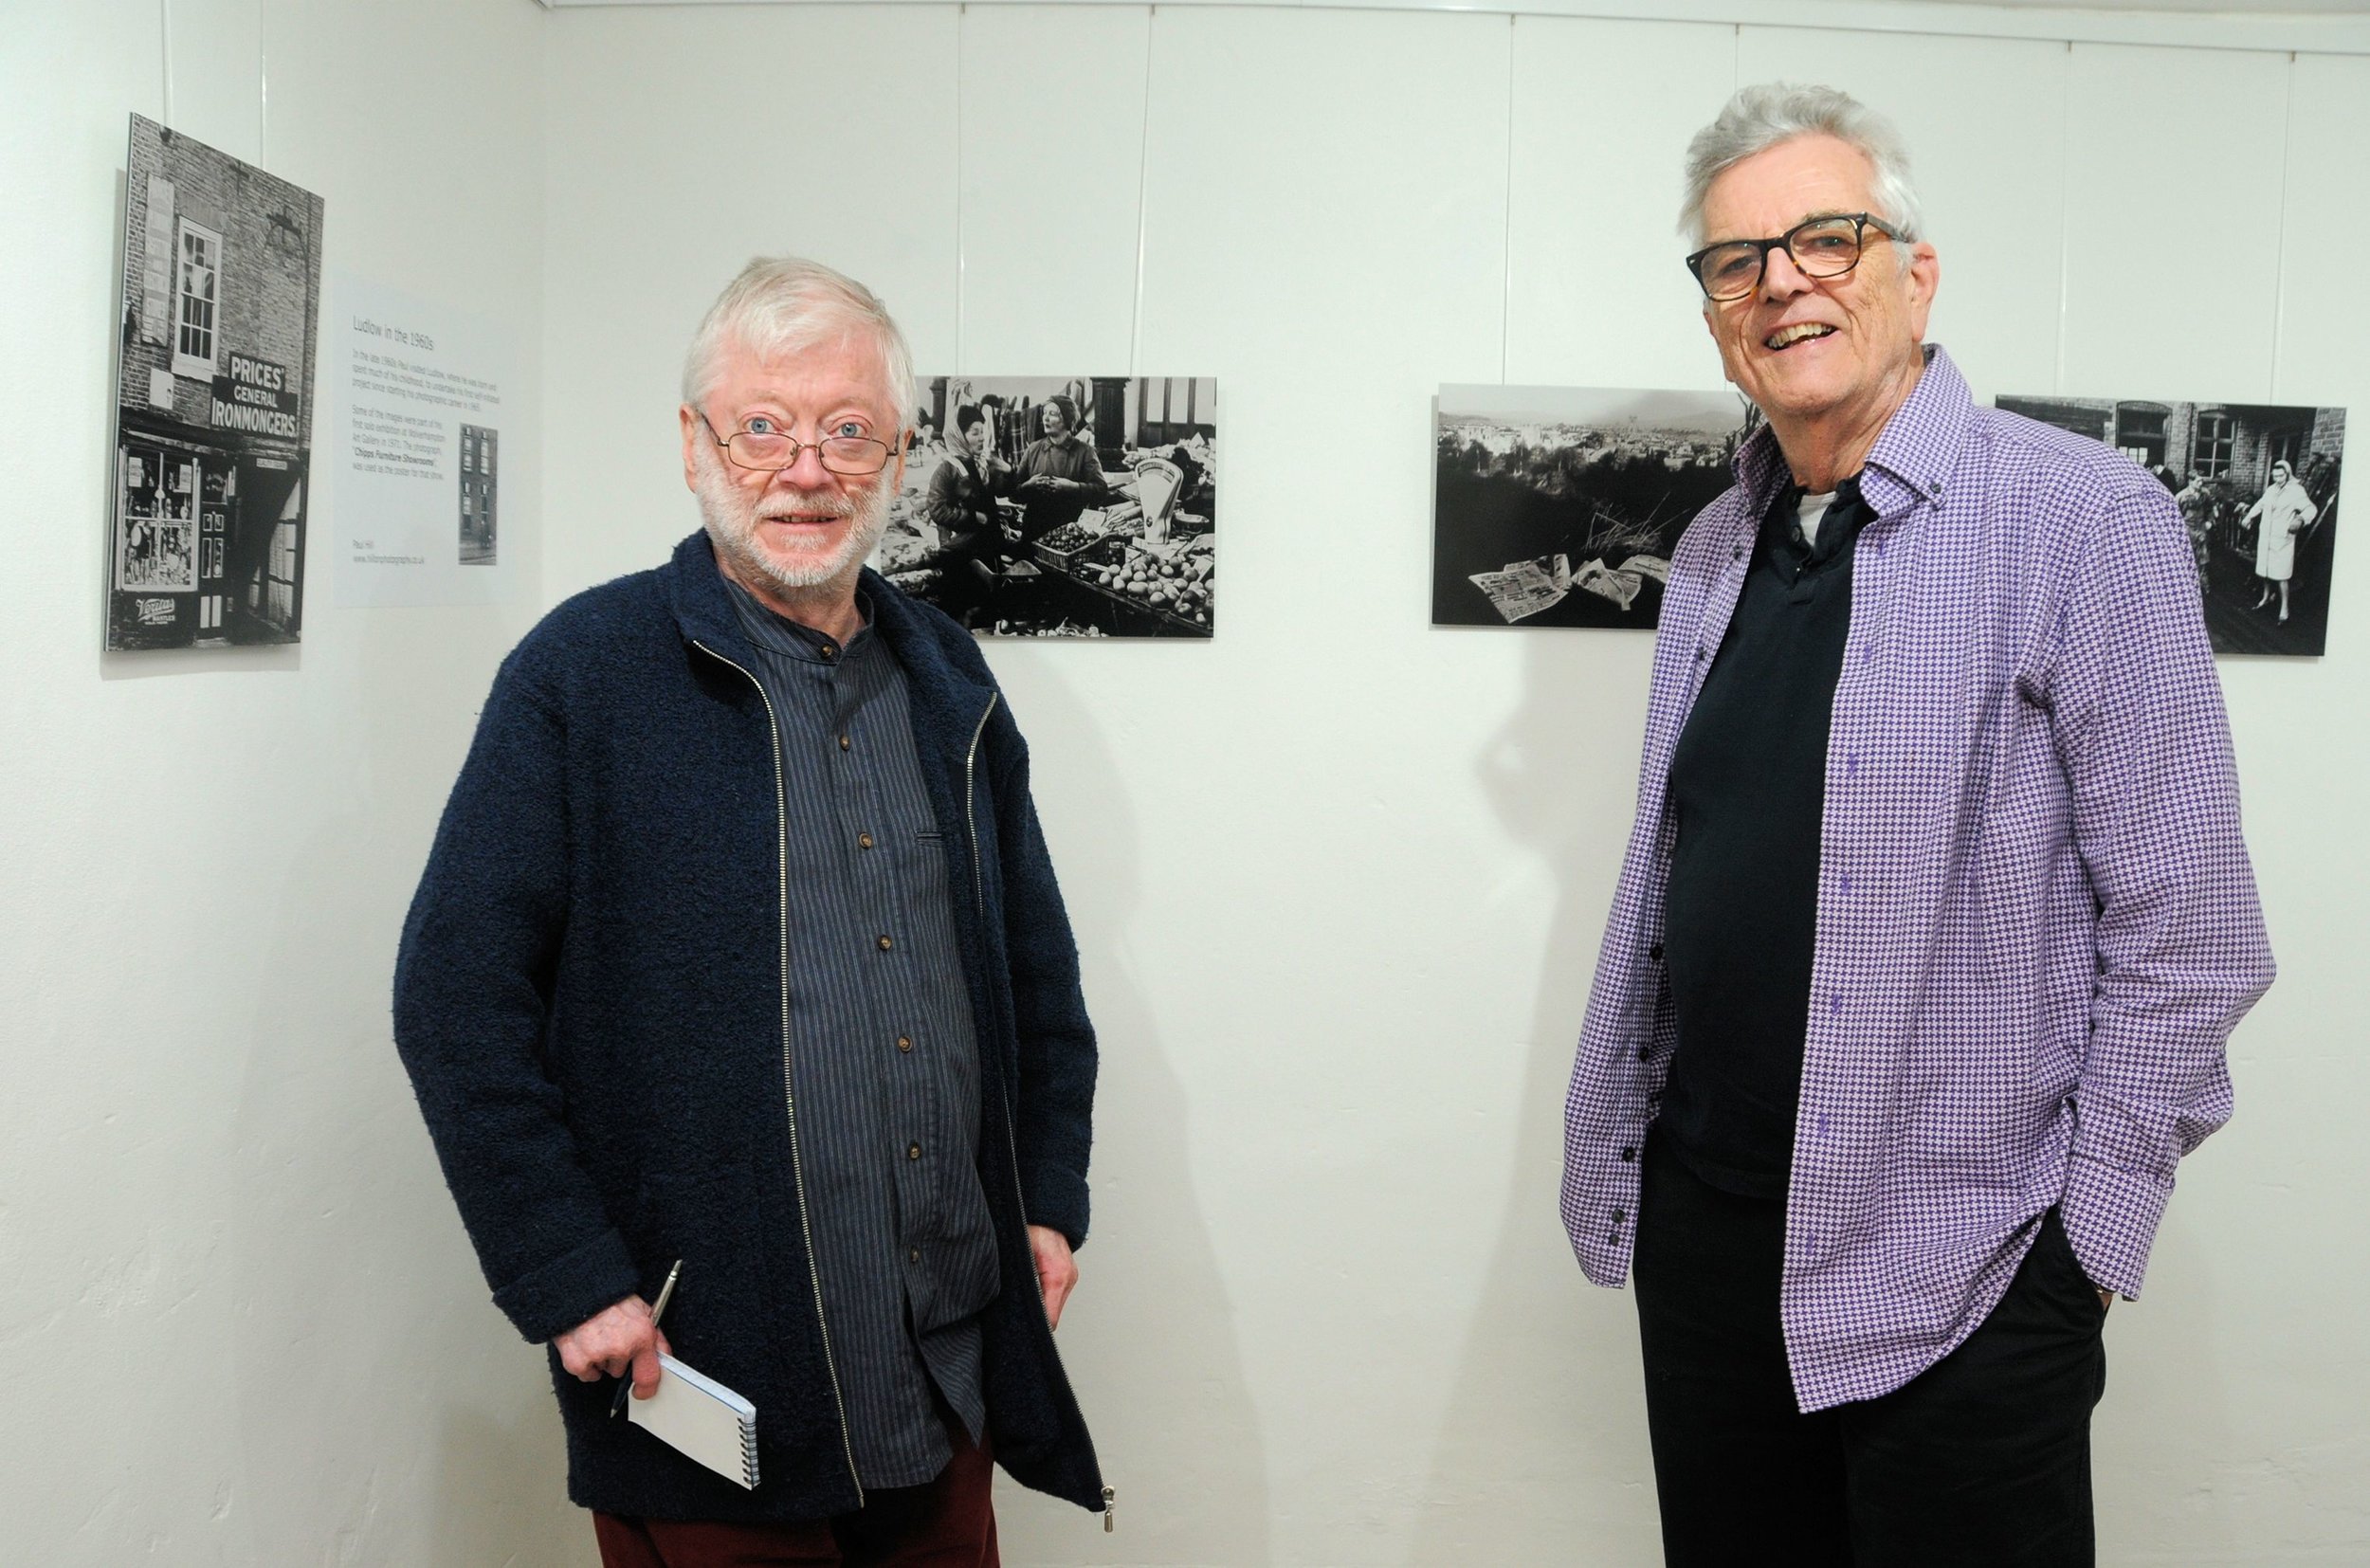 Peter with artist Paul Hill at his latest exhibition on Ludlow credit: the photo space